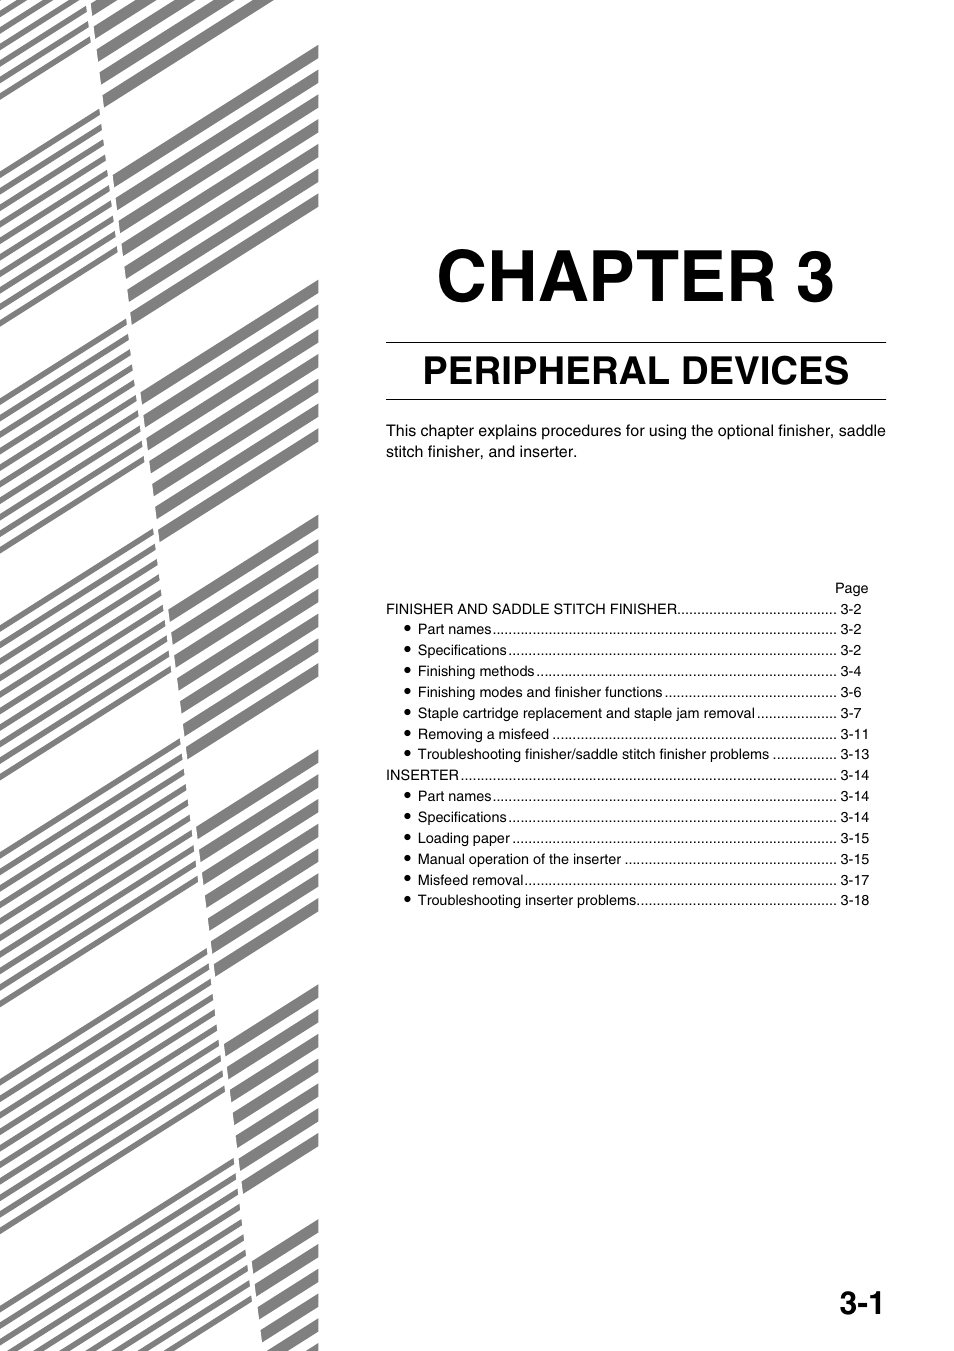 Peripheral devices, Chapter 3 peripheral devices, Chapter 3 | Sharp AR-M700N User Manual | Page 57 / 172